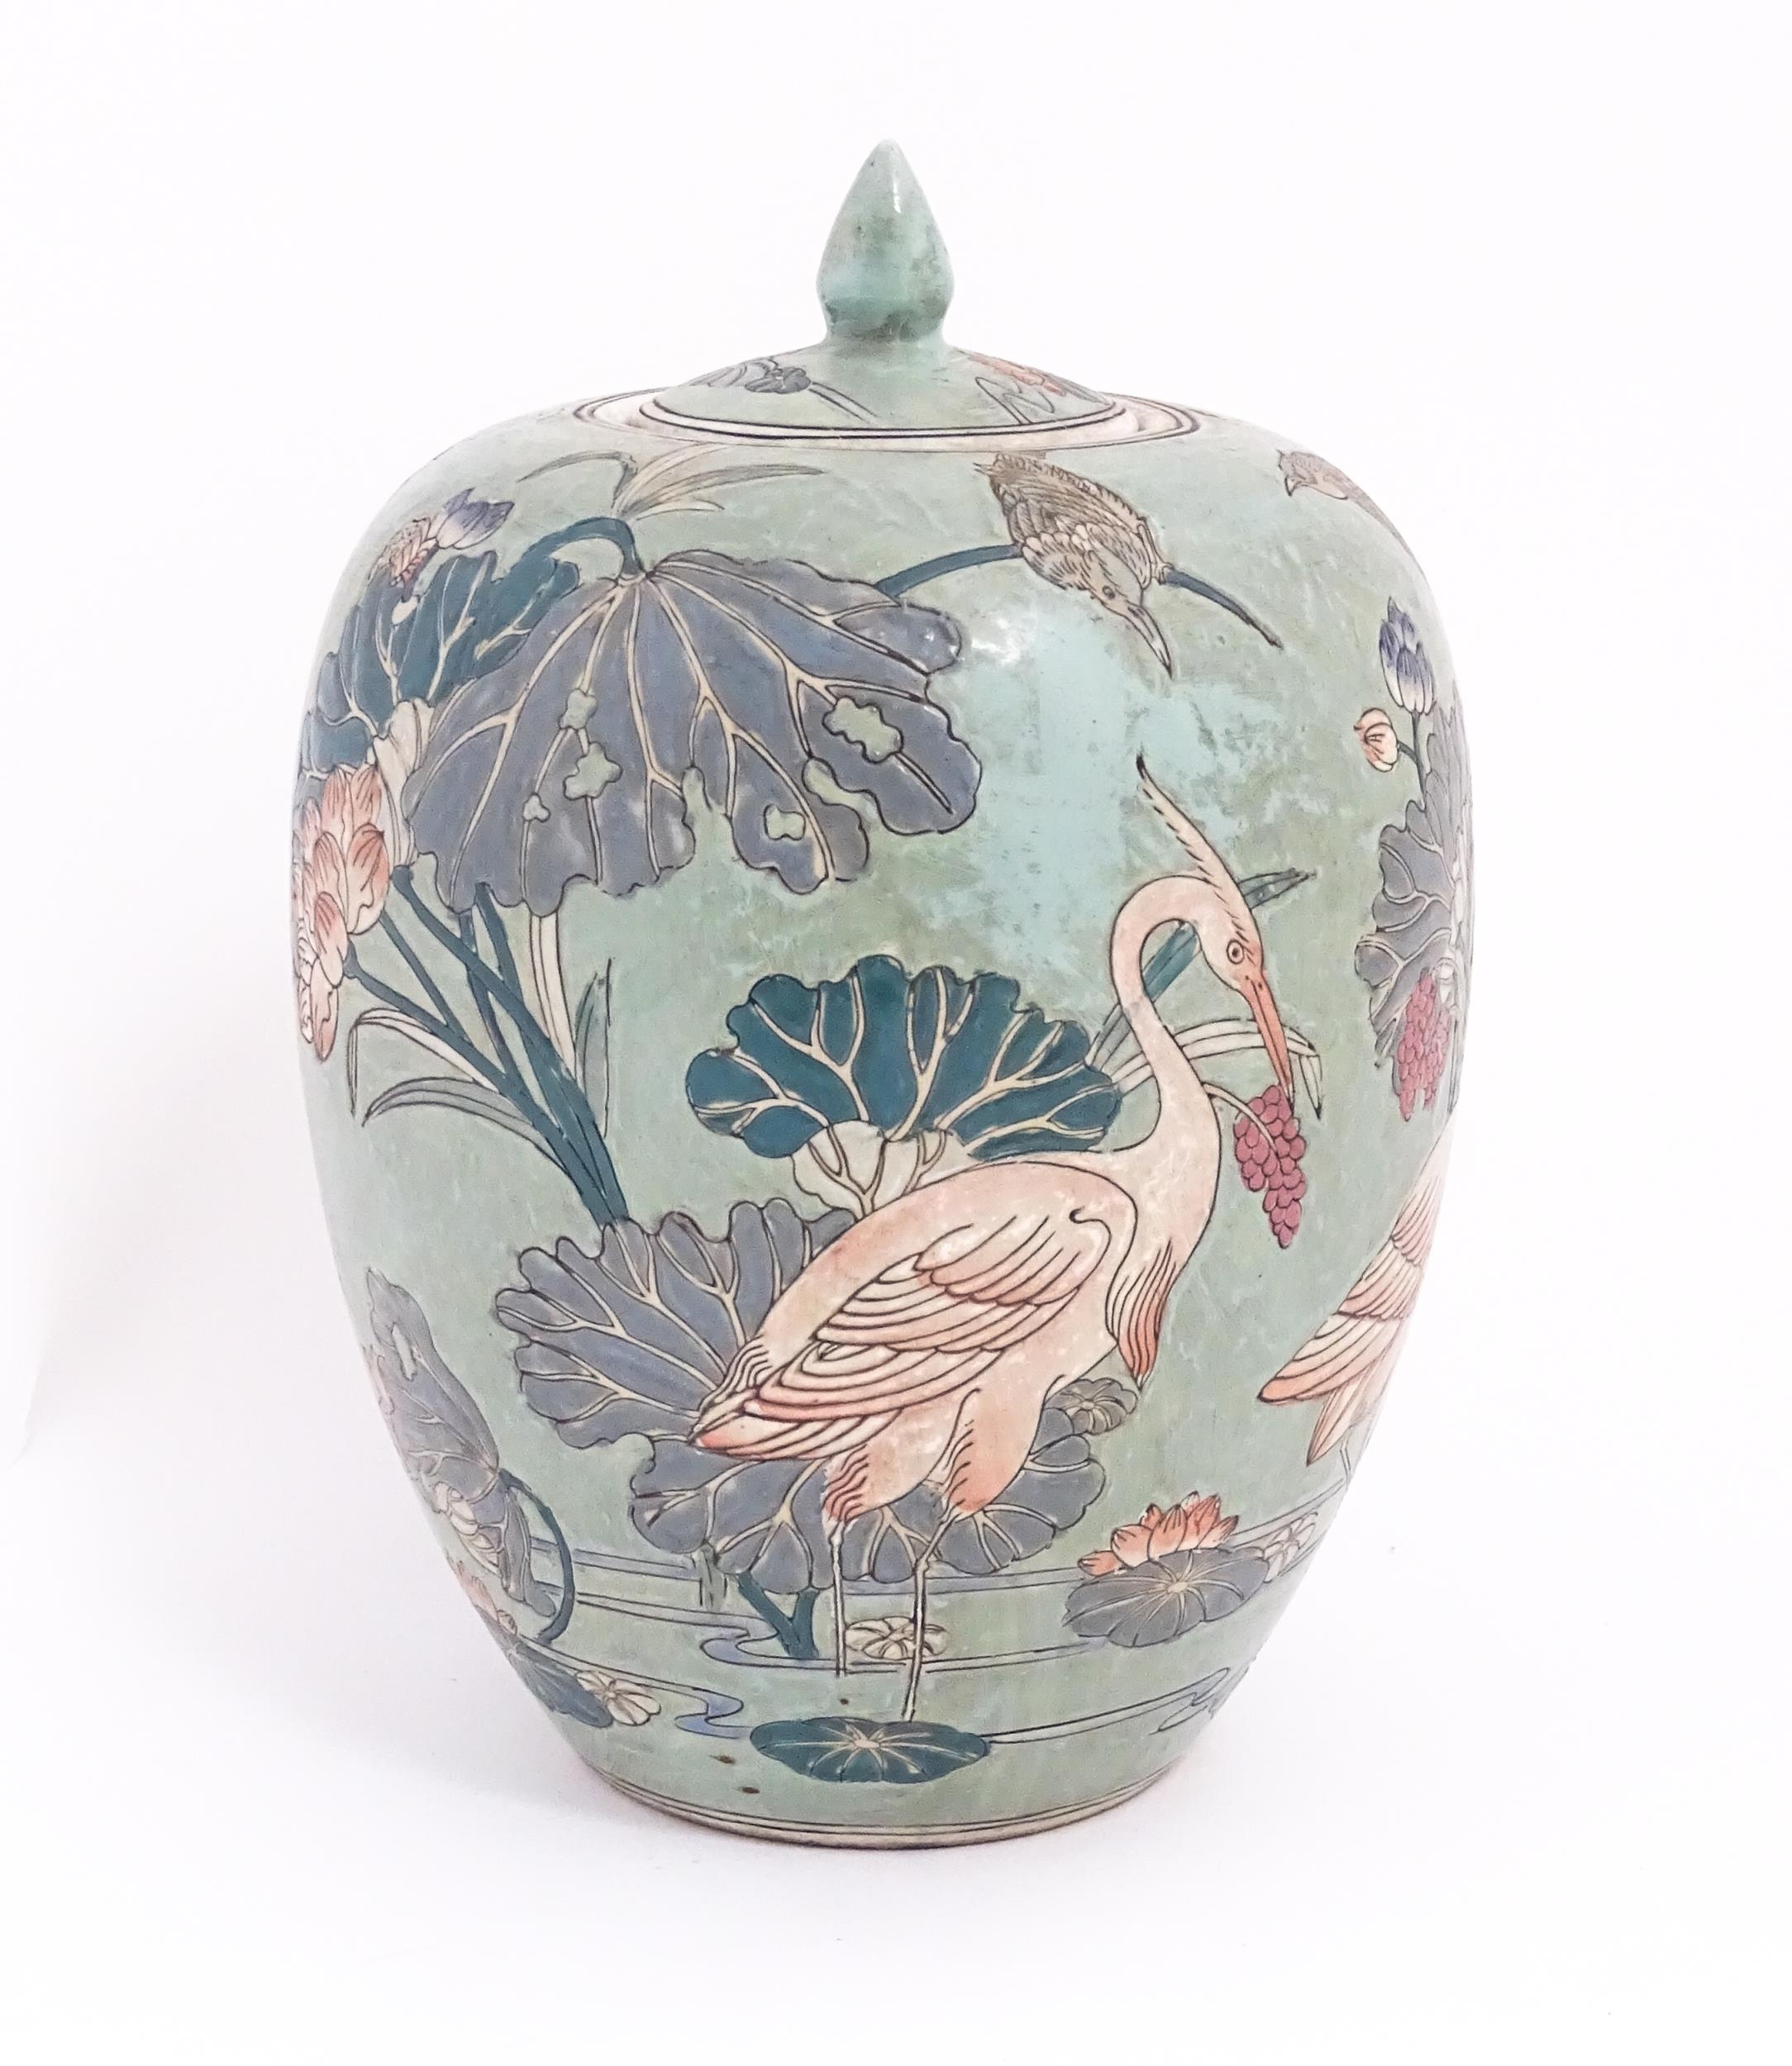 A Chinese ginger jar with celadon style glaze decorated with crane birds, flowers, lily pads, etc. - Image 4 of 8